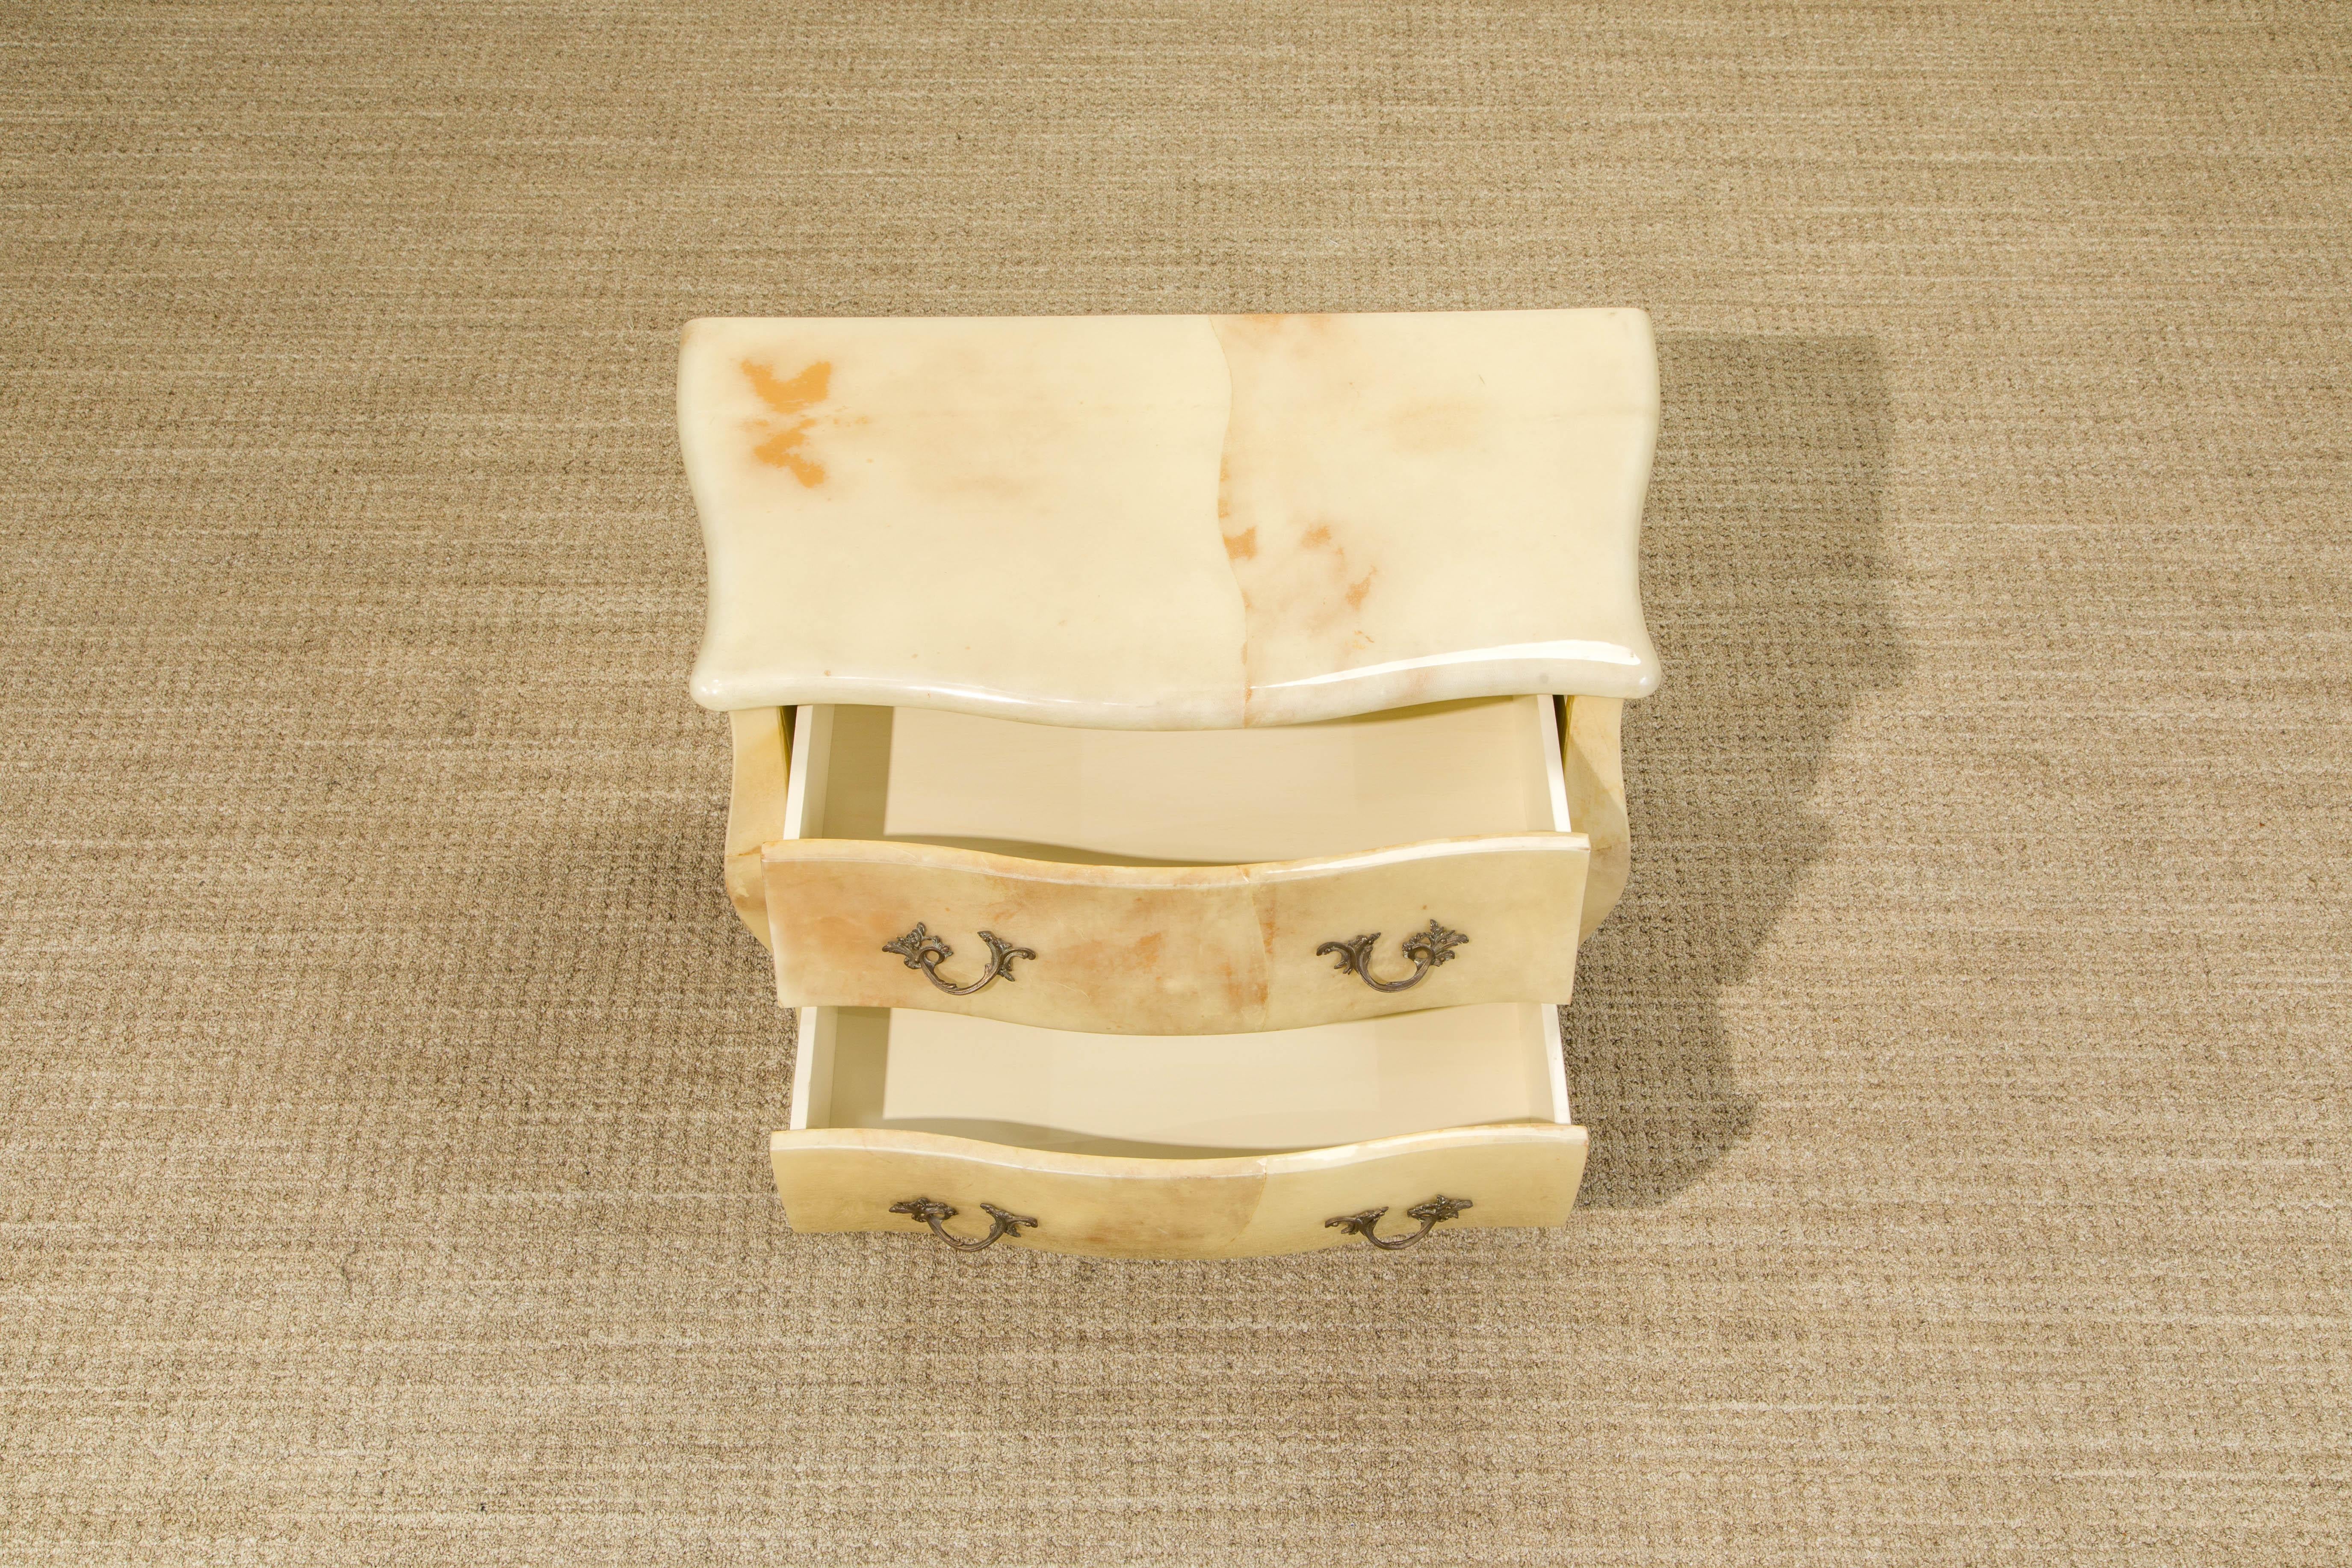 Enrique Garcel Large Lacquered Goatskin and Brass Nightstands, c 1970s, Signed For Sale 3